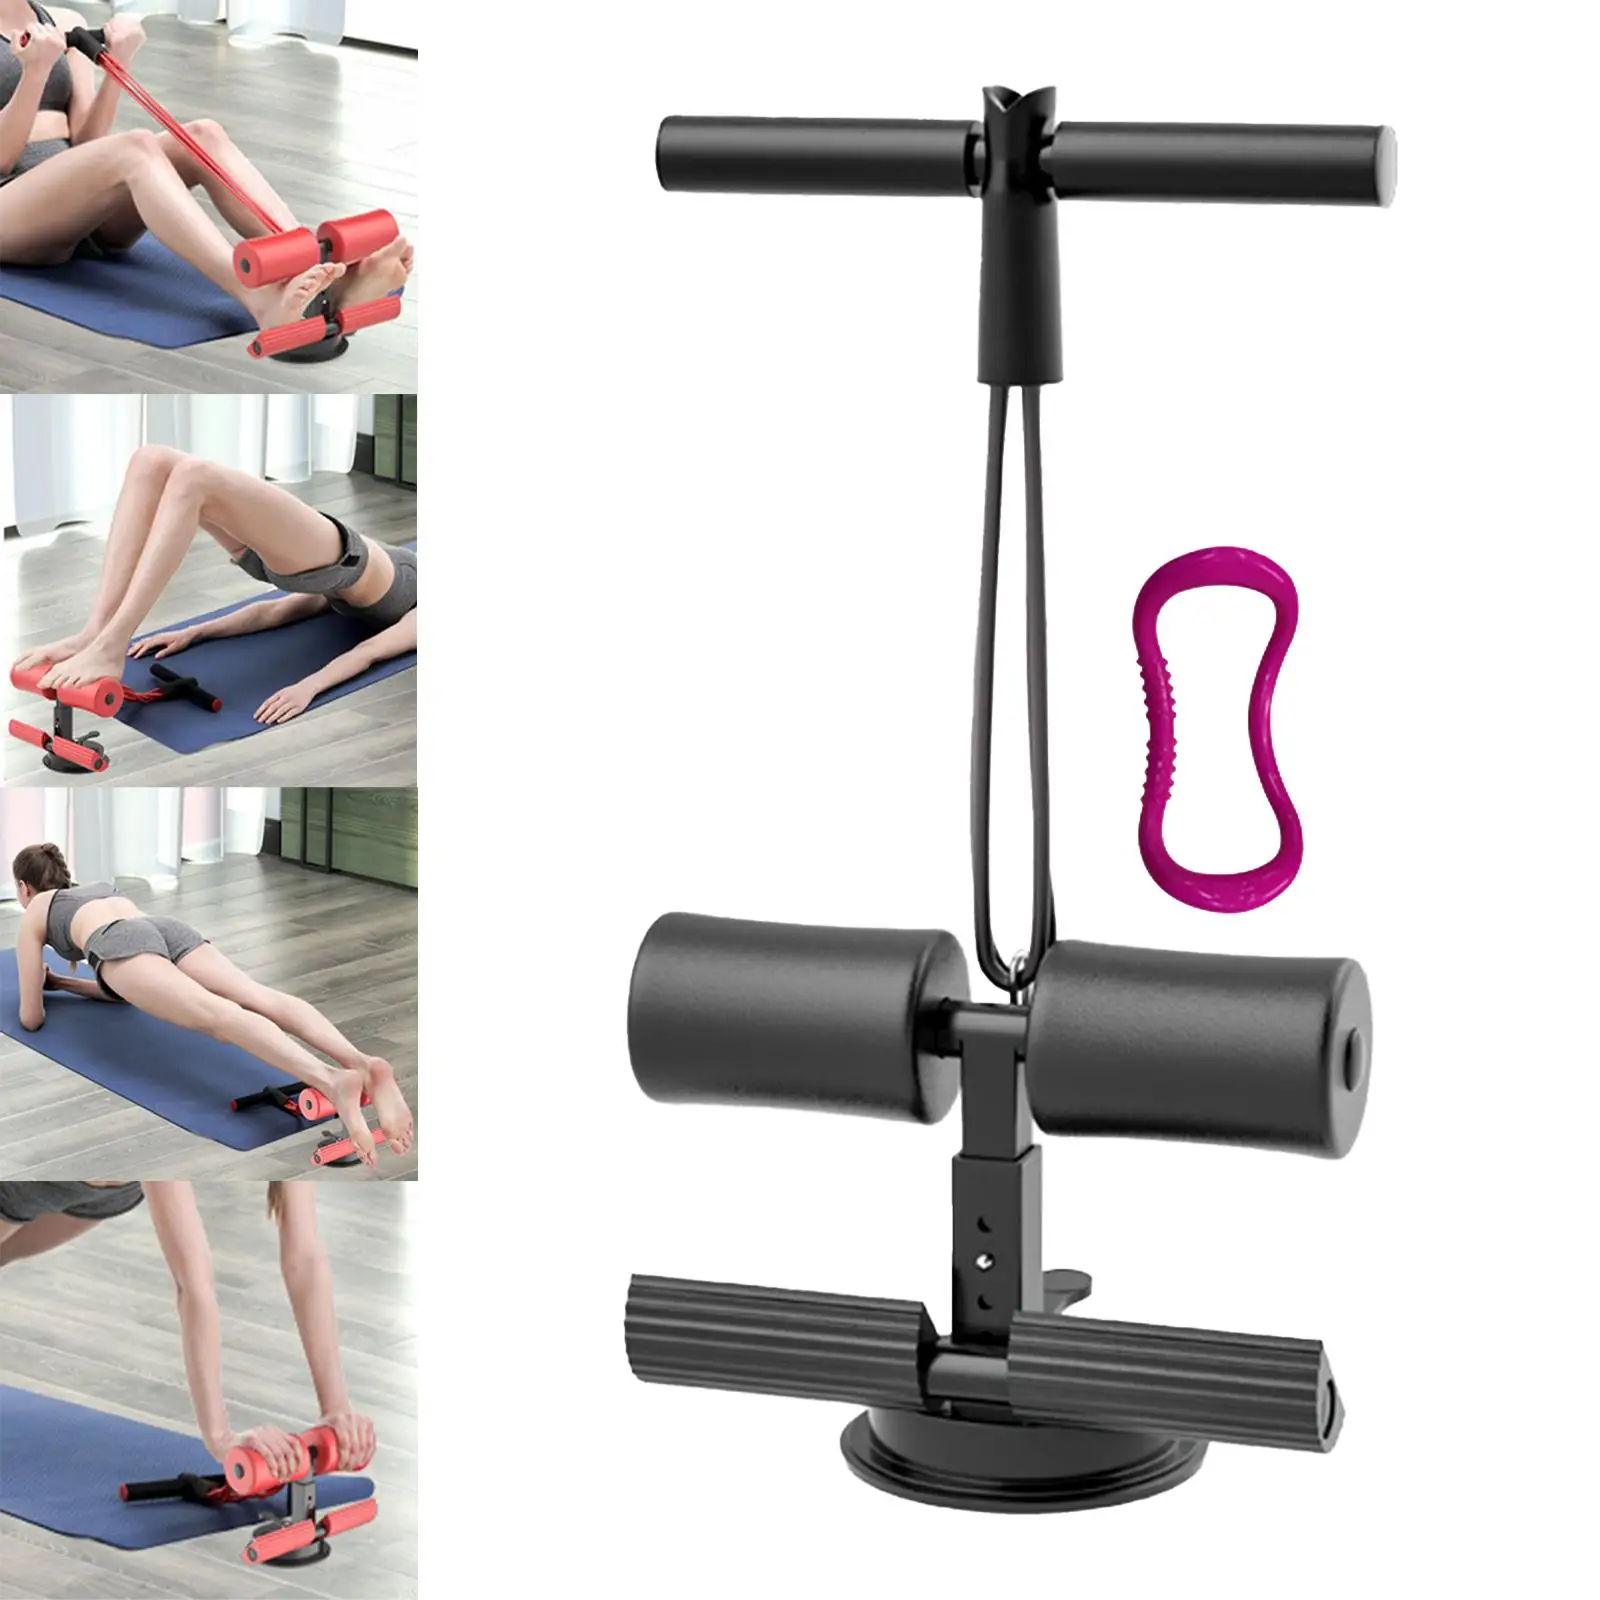 Ankle Support Supplies Equipment Abdominal Portable with Suction Cup Bar Aids Device Sit up Rack for Gym Exercise Fitness Home